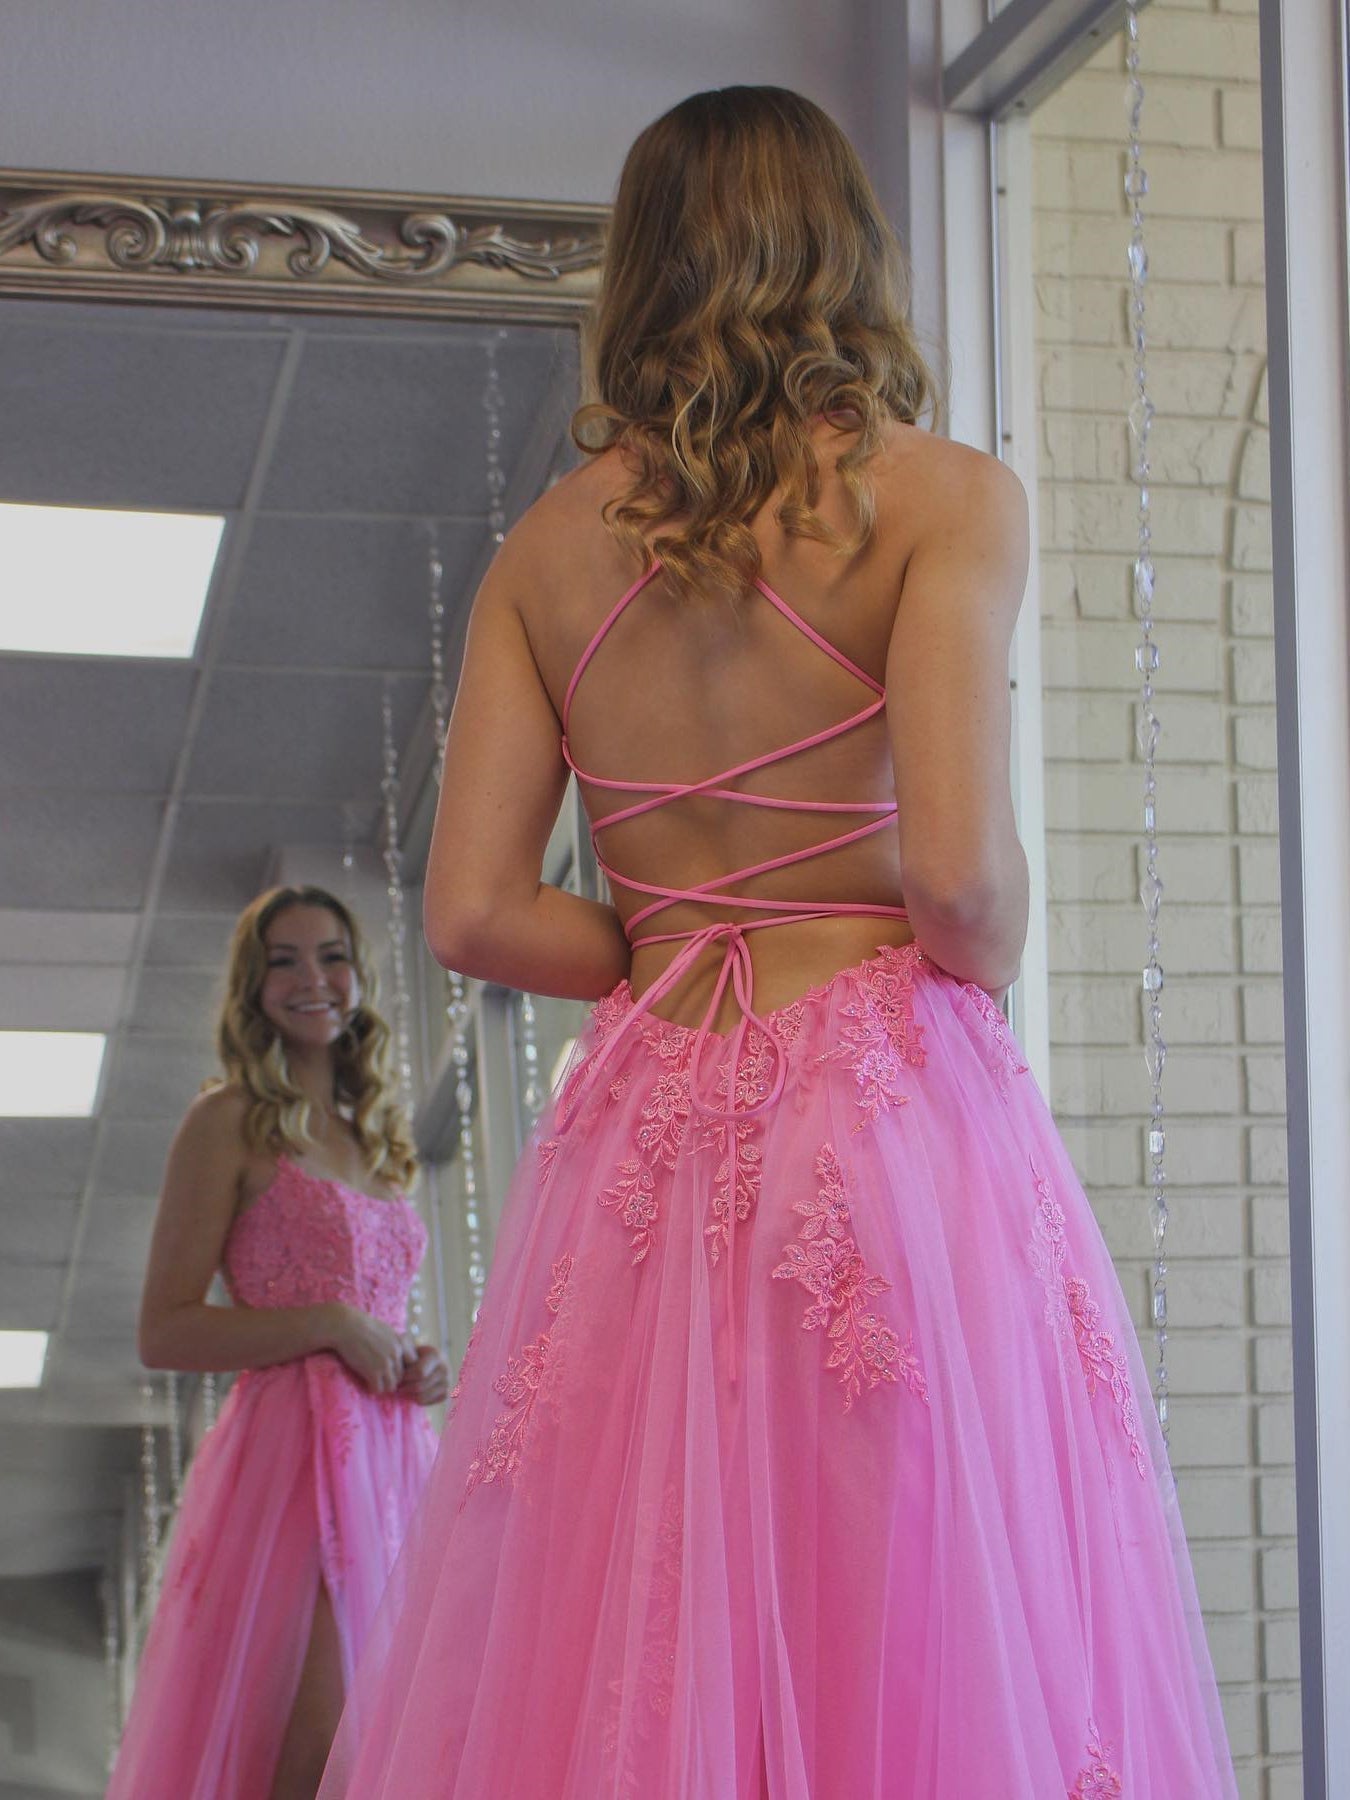 Long A-line Tulle Lace Backless Prom Dress with Slit Pink Formal Evening Gowns-BIZTUNNEL